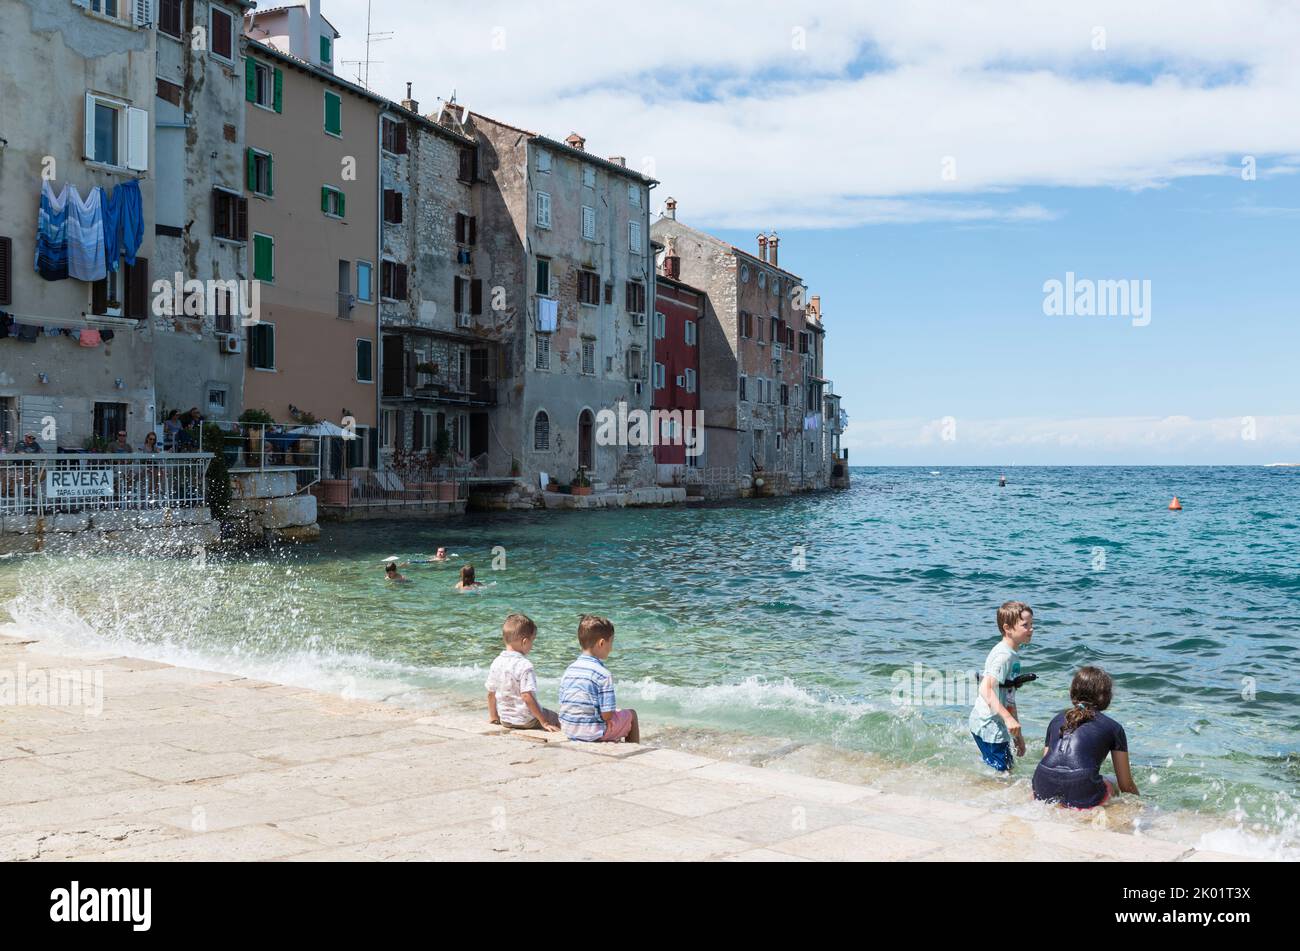 Children playing in the water on the embankment of the historic town of Rovinj, Croatia, Europe Stock Photo